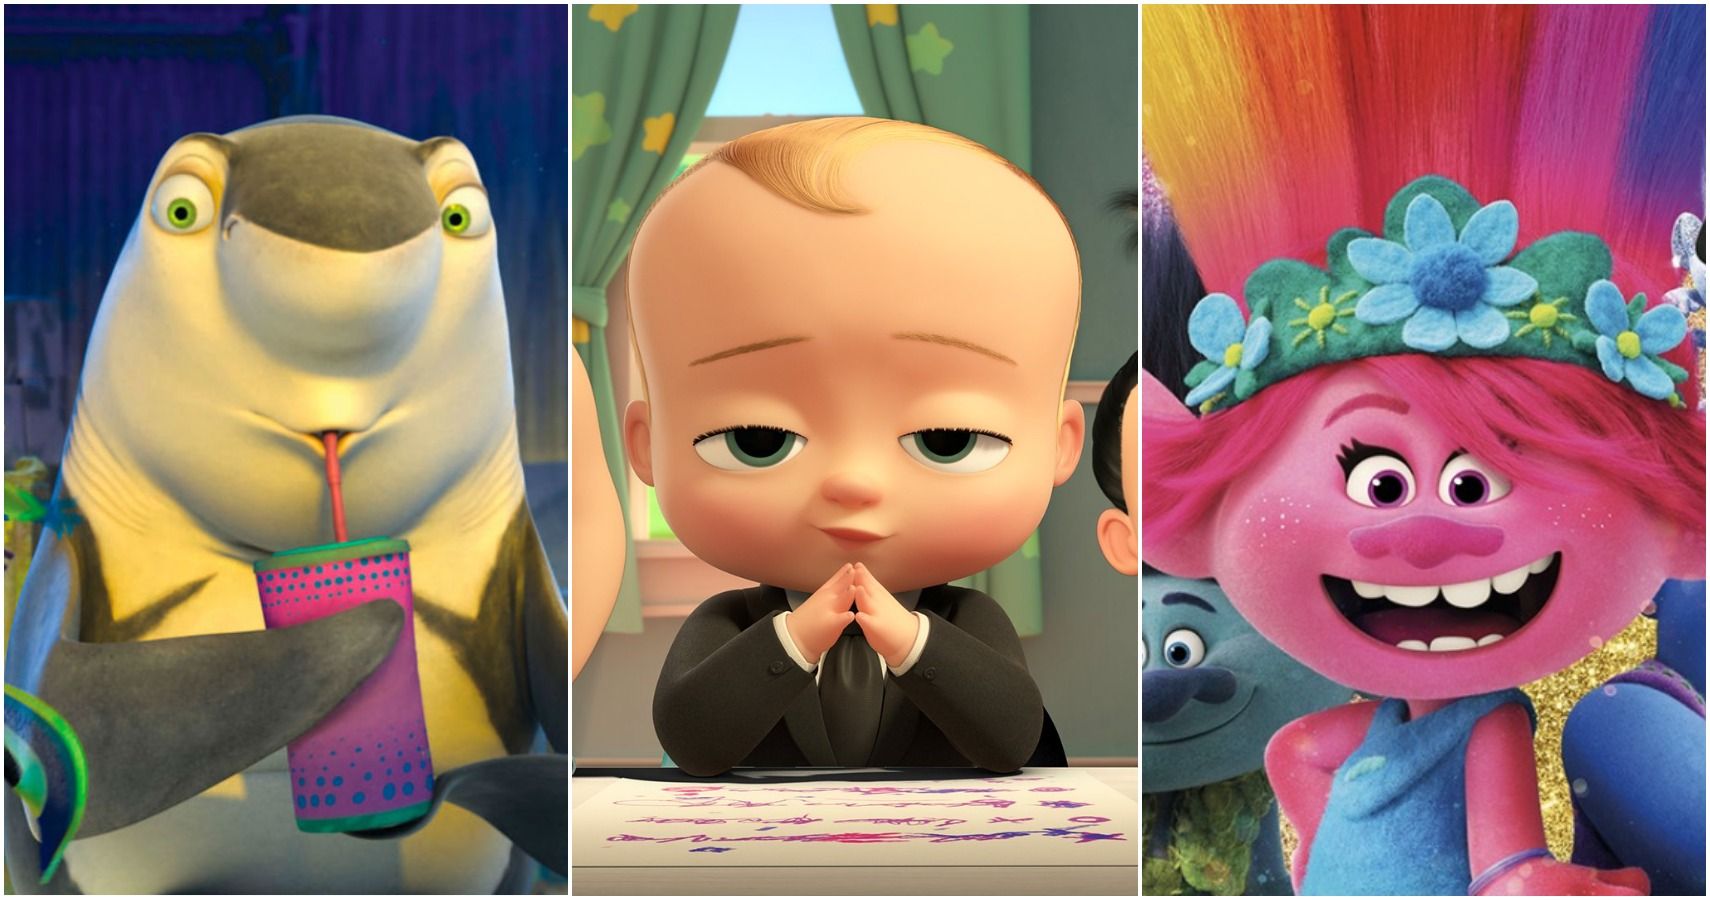 5 Best & 5 Worst Dreamworks Animated Movies (According To Metacritic)